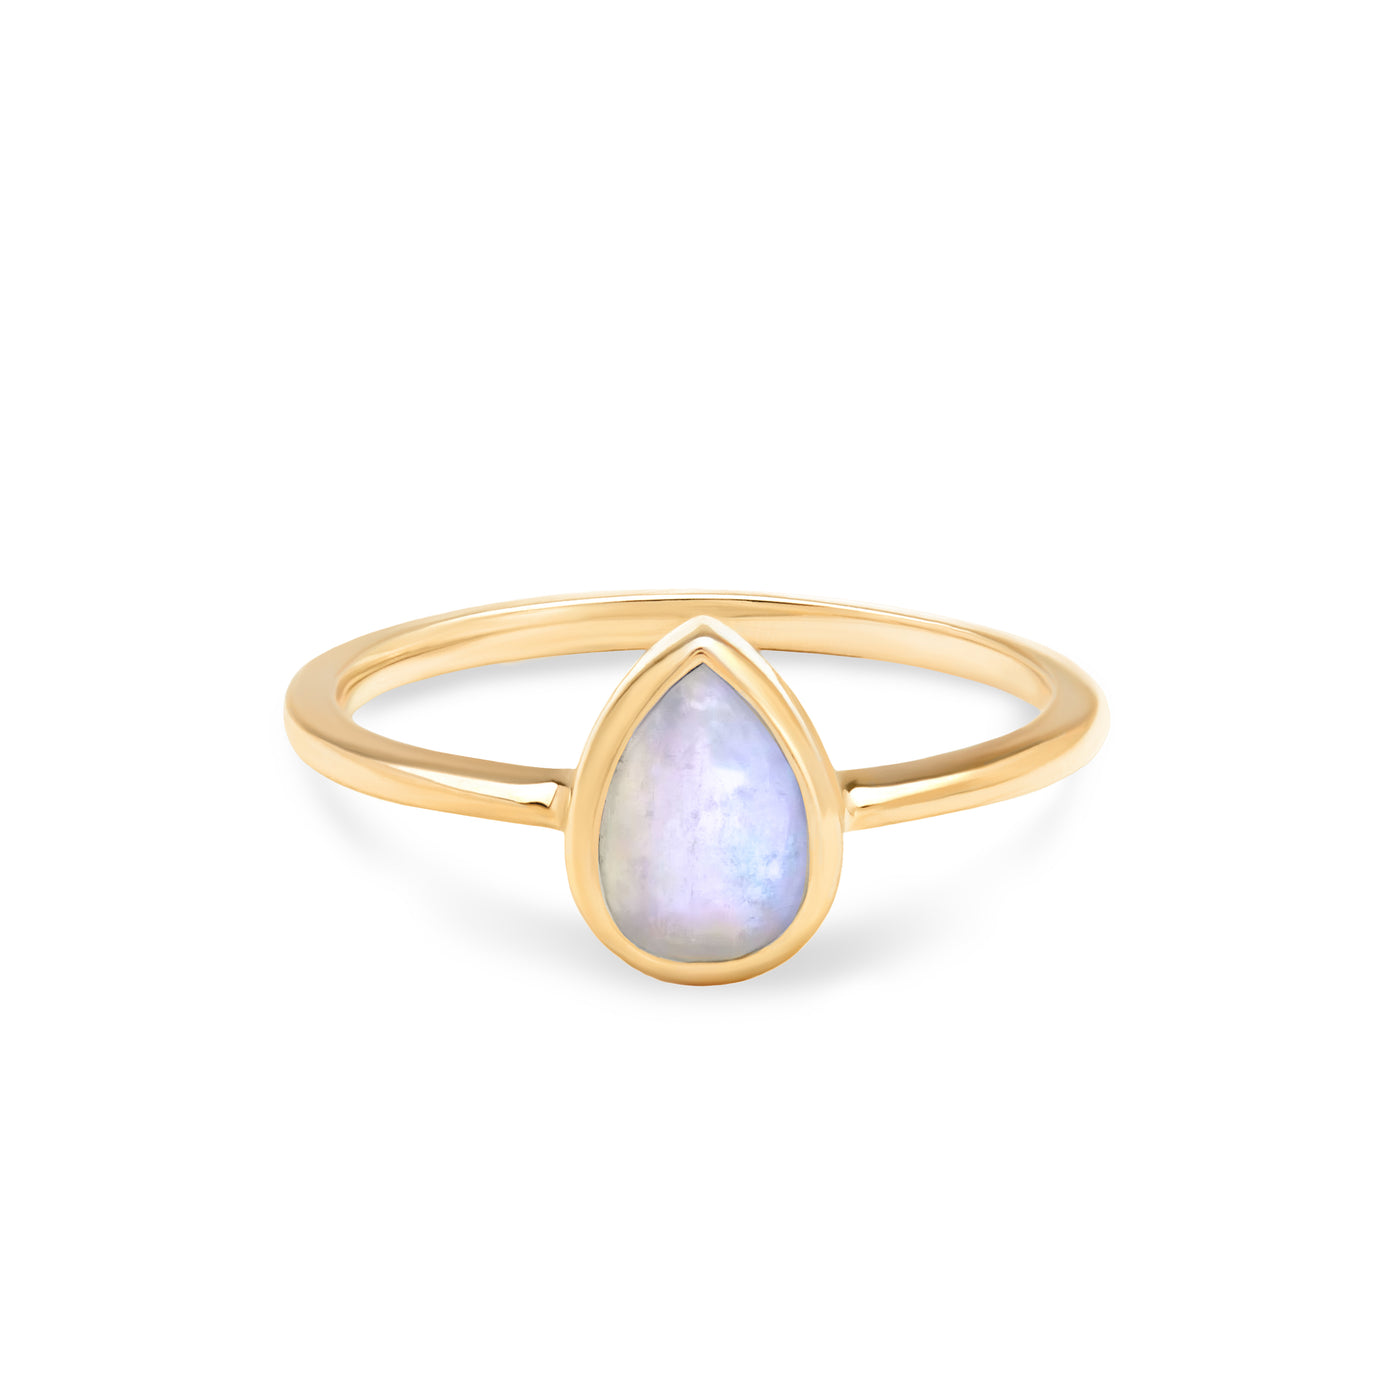 14 Karat Yellow Gold Ring with Pear Shaped Moonstone Against White Background